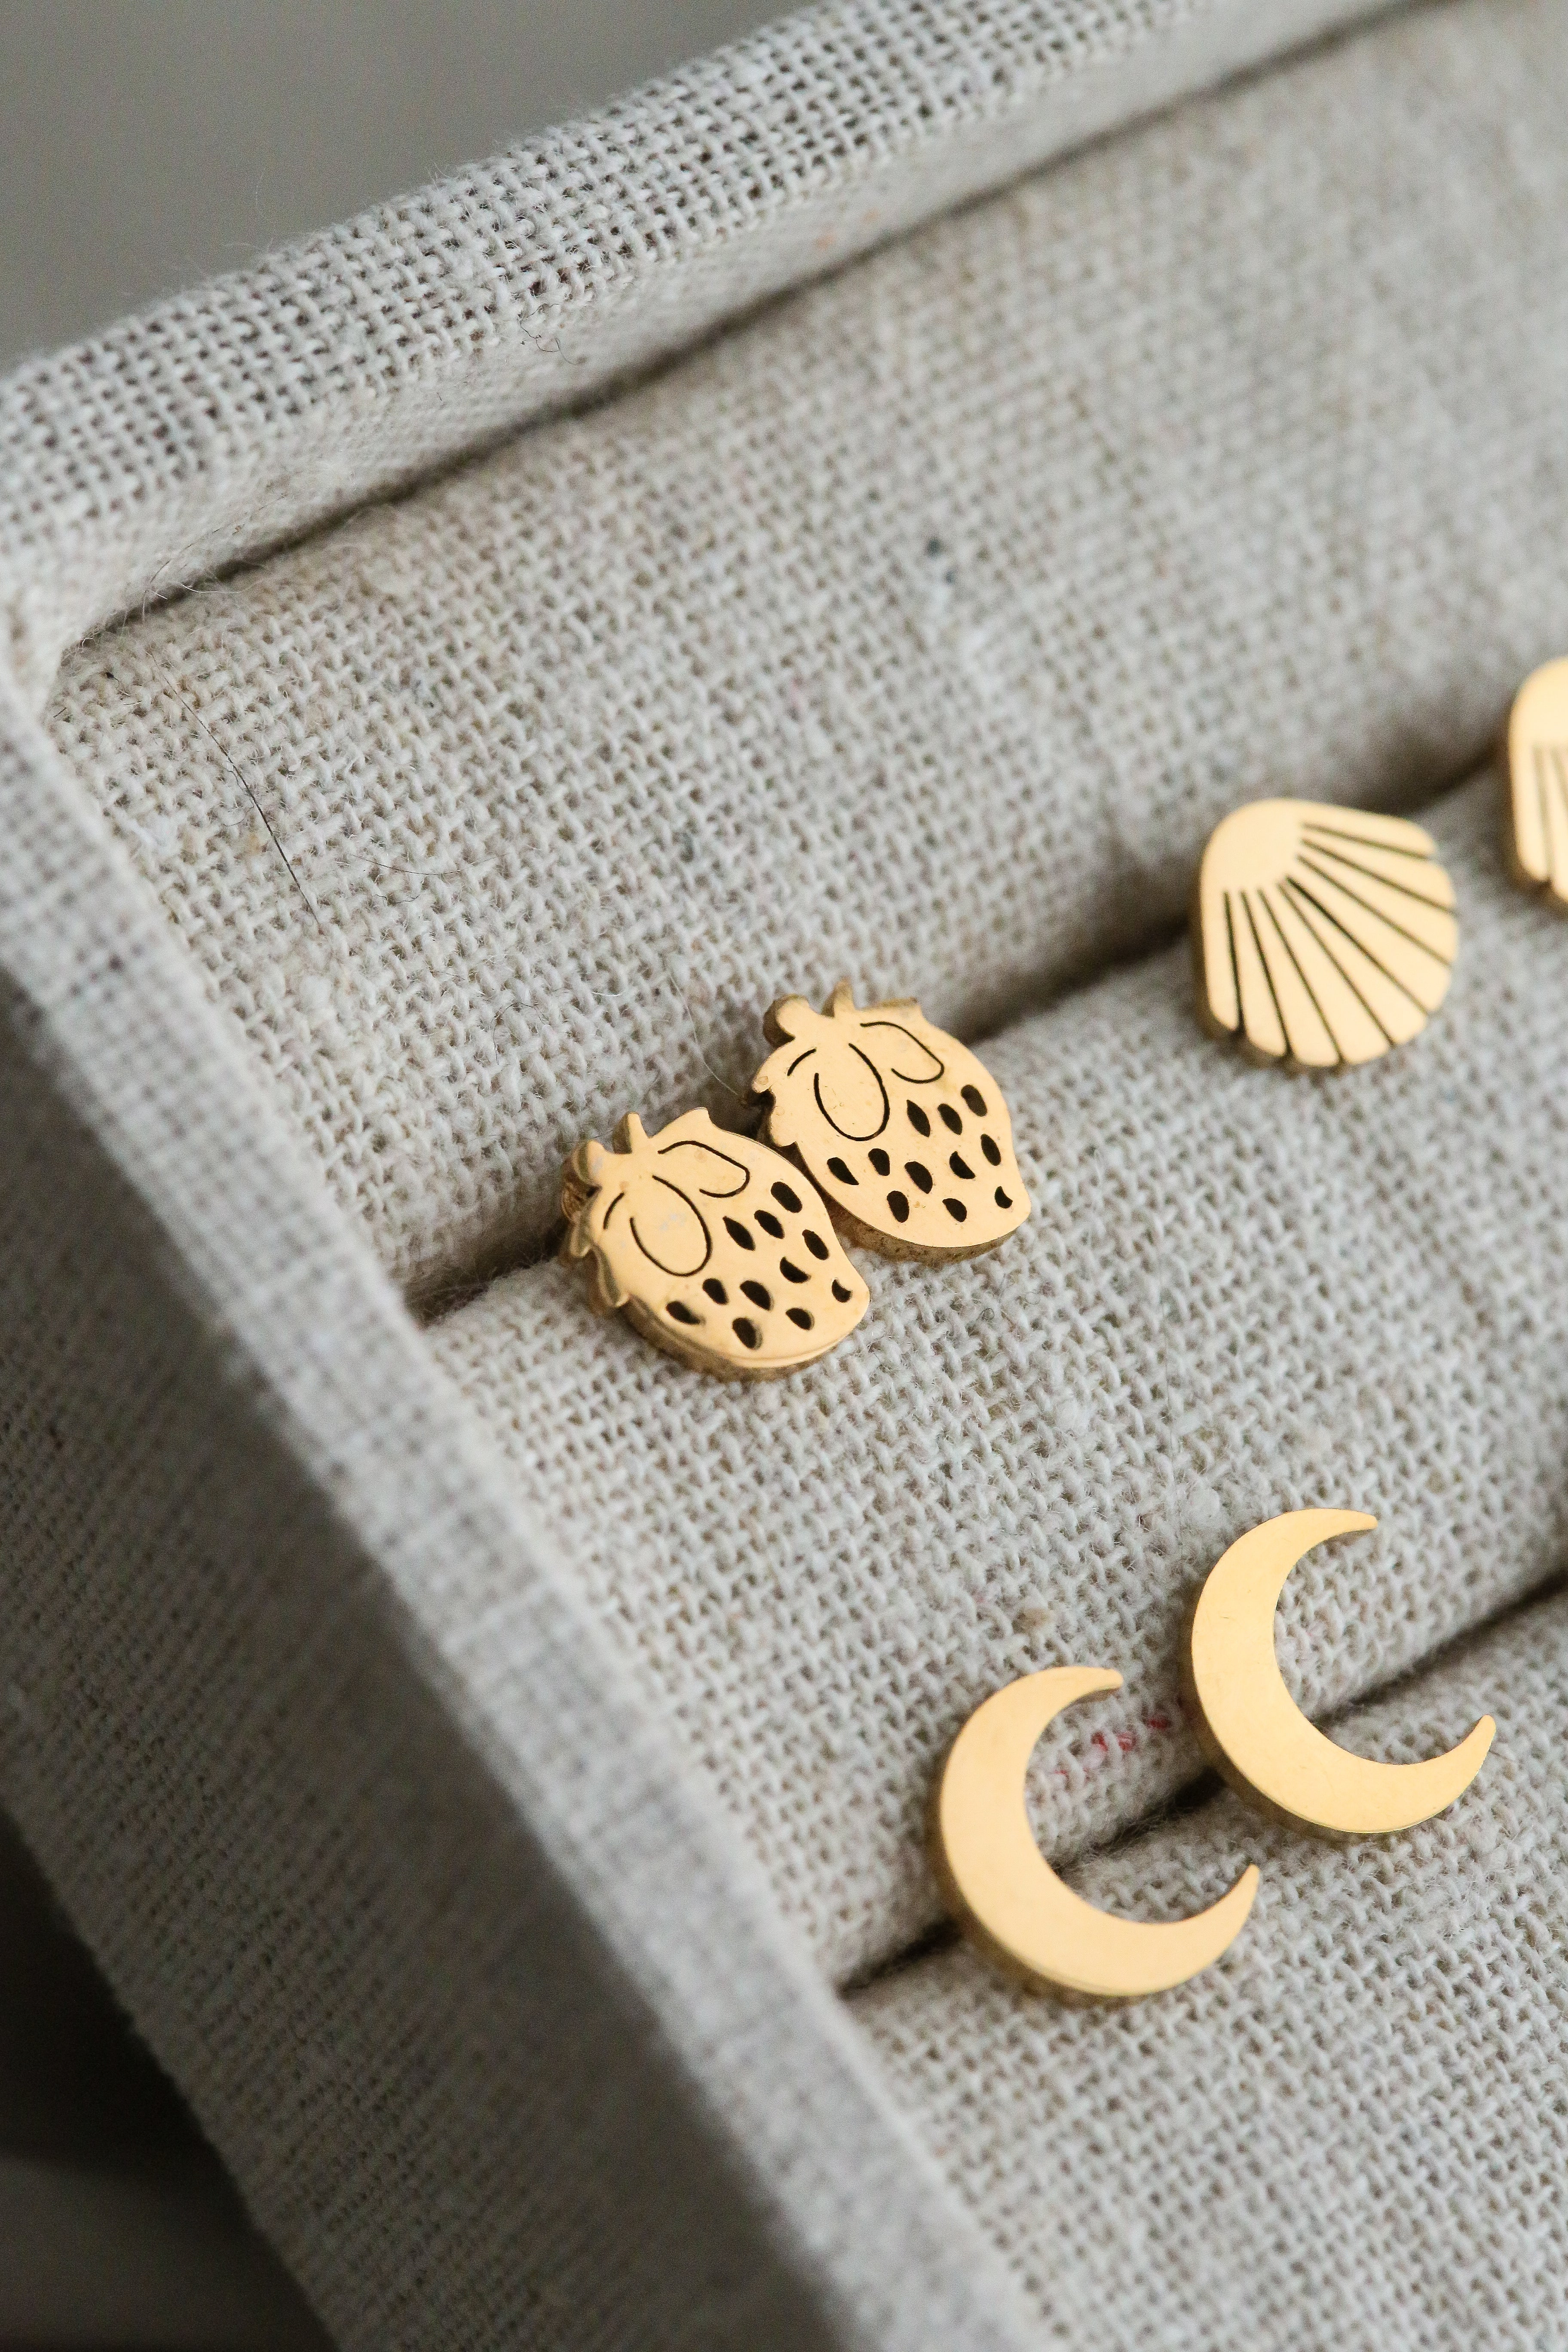 Lille Ear Studs - Boutique Minimaliste has waterproof, durable, elegant and vintage inspired jewelry